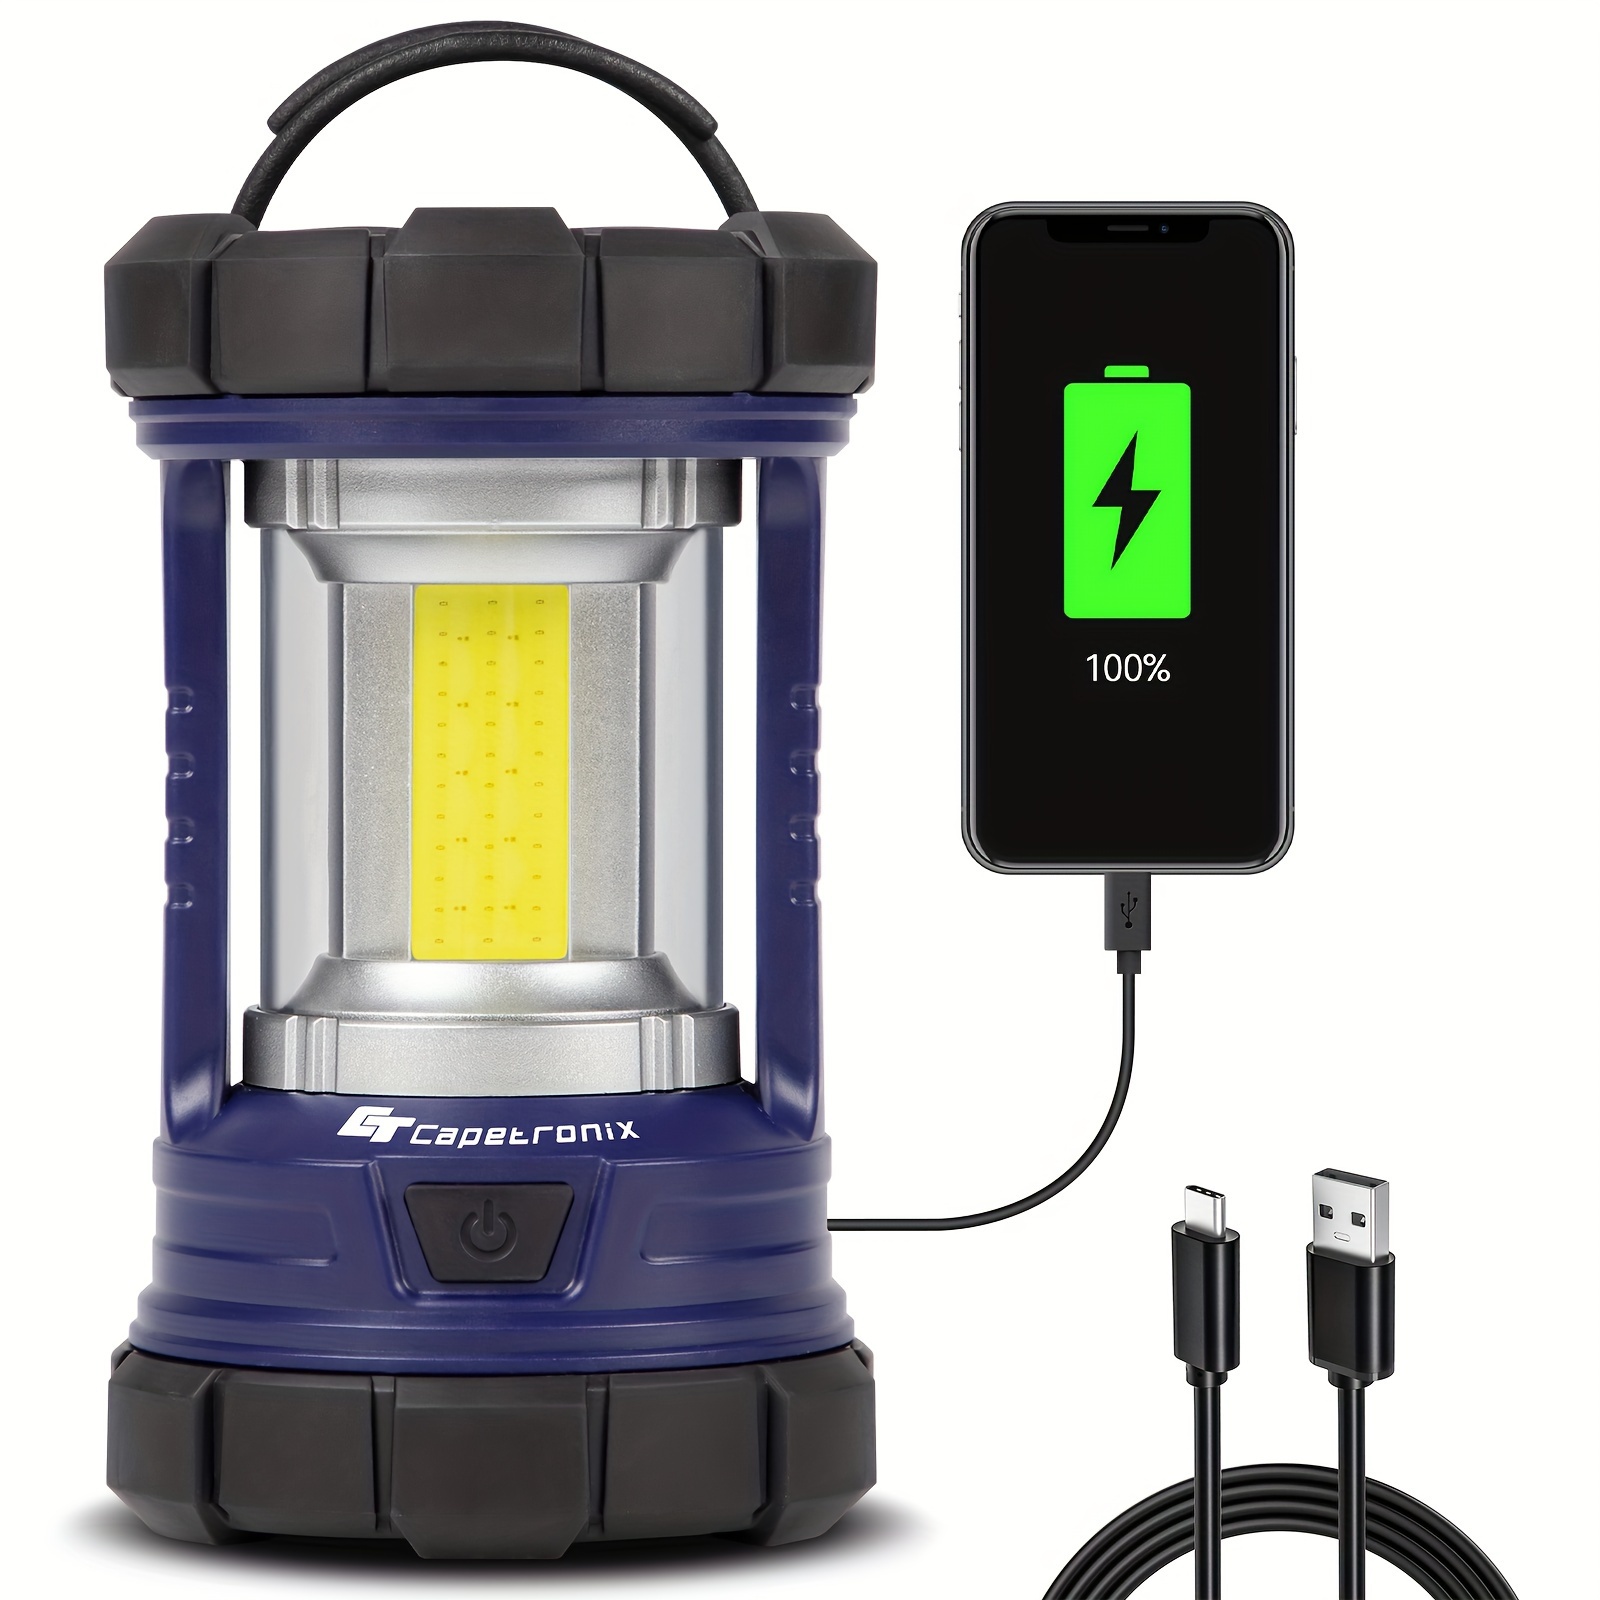 

Camping Lantern, 3200lm Led Lanterns For Power Outages, 4600mah Rechargeable Lantern, 5 Light Modes Camping Lights & Lanterns For Hurricane/emergency, Camping Accessories